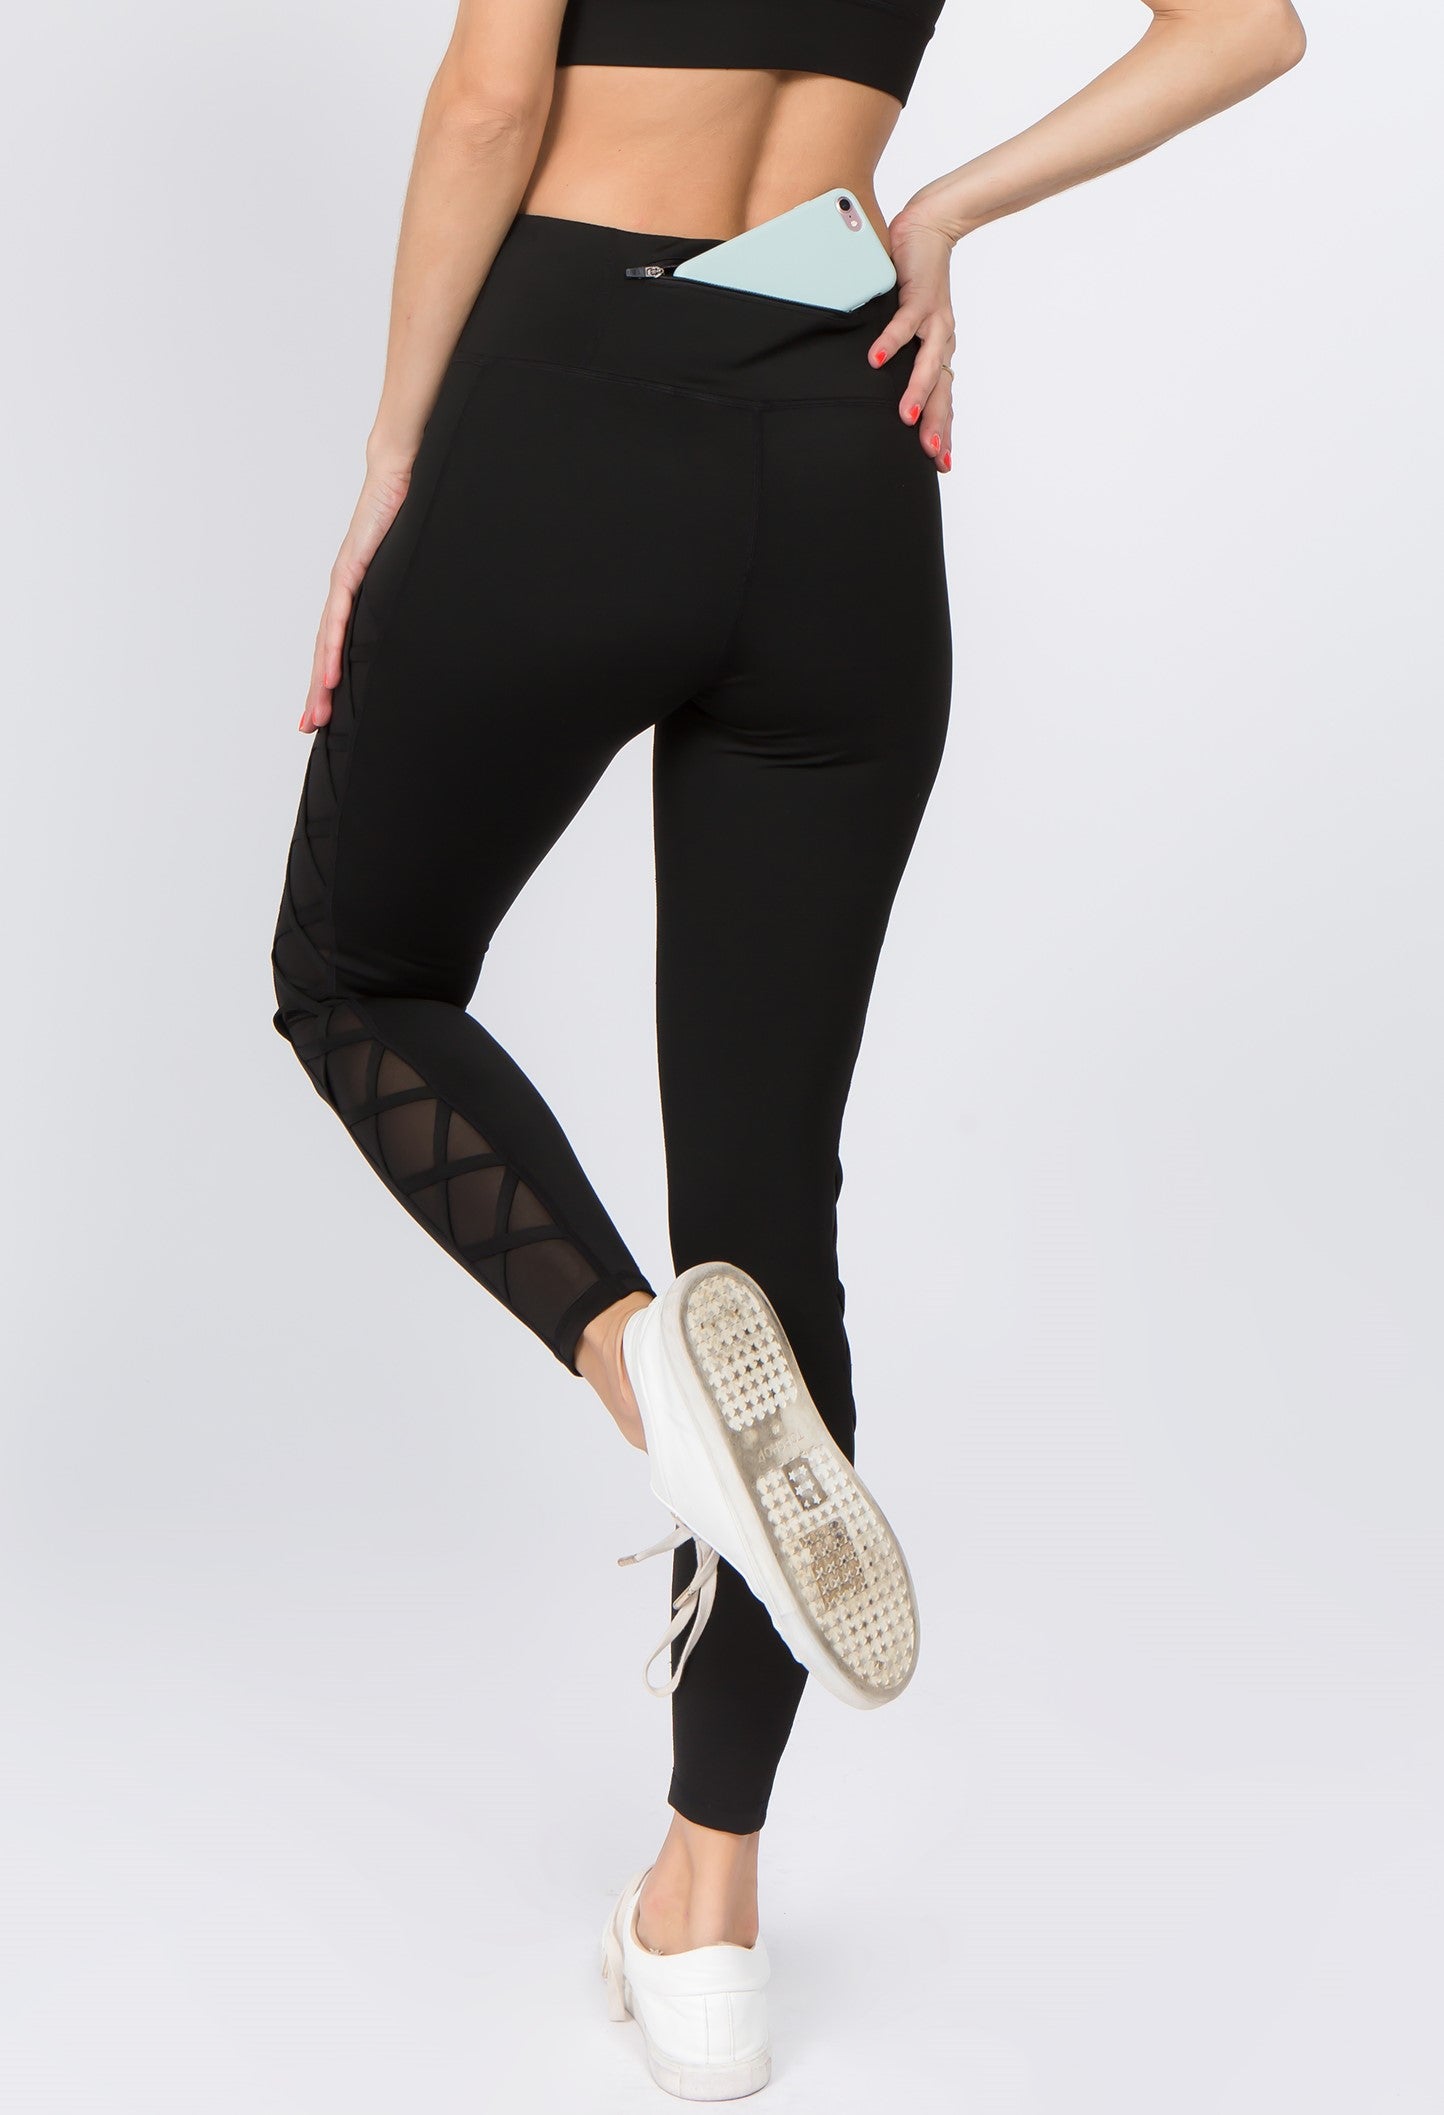 Women's Active Lace-Up Mesh Side Workout Legging